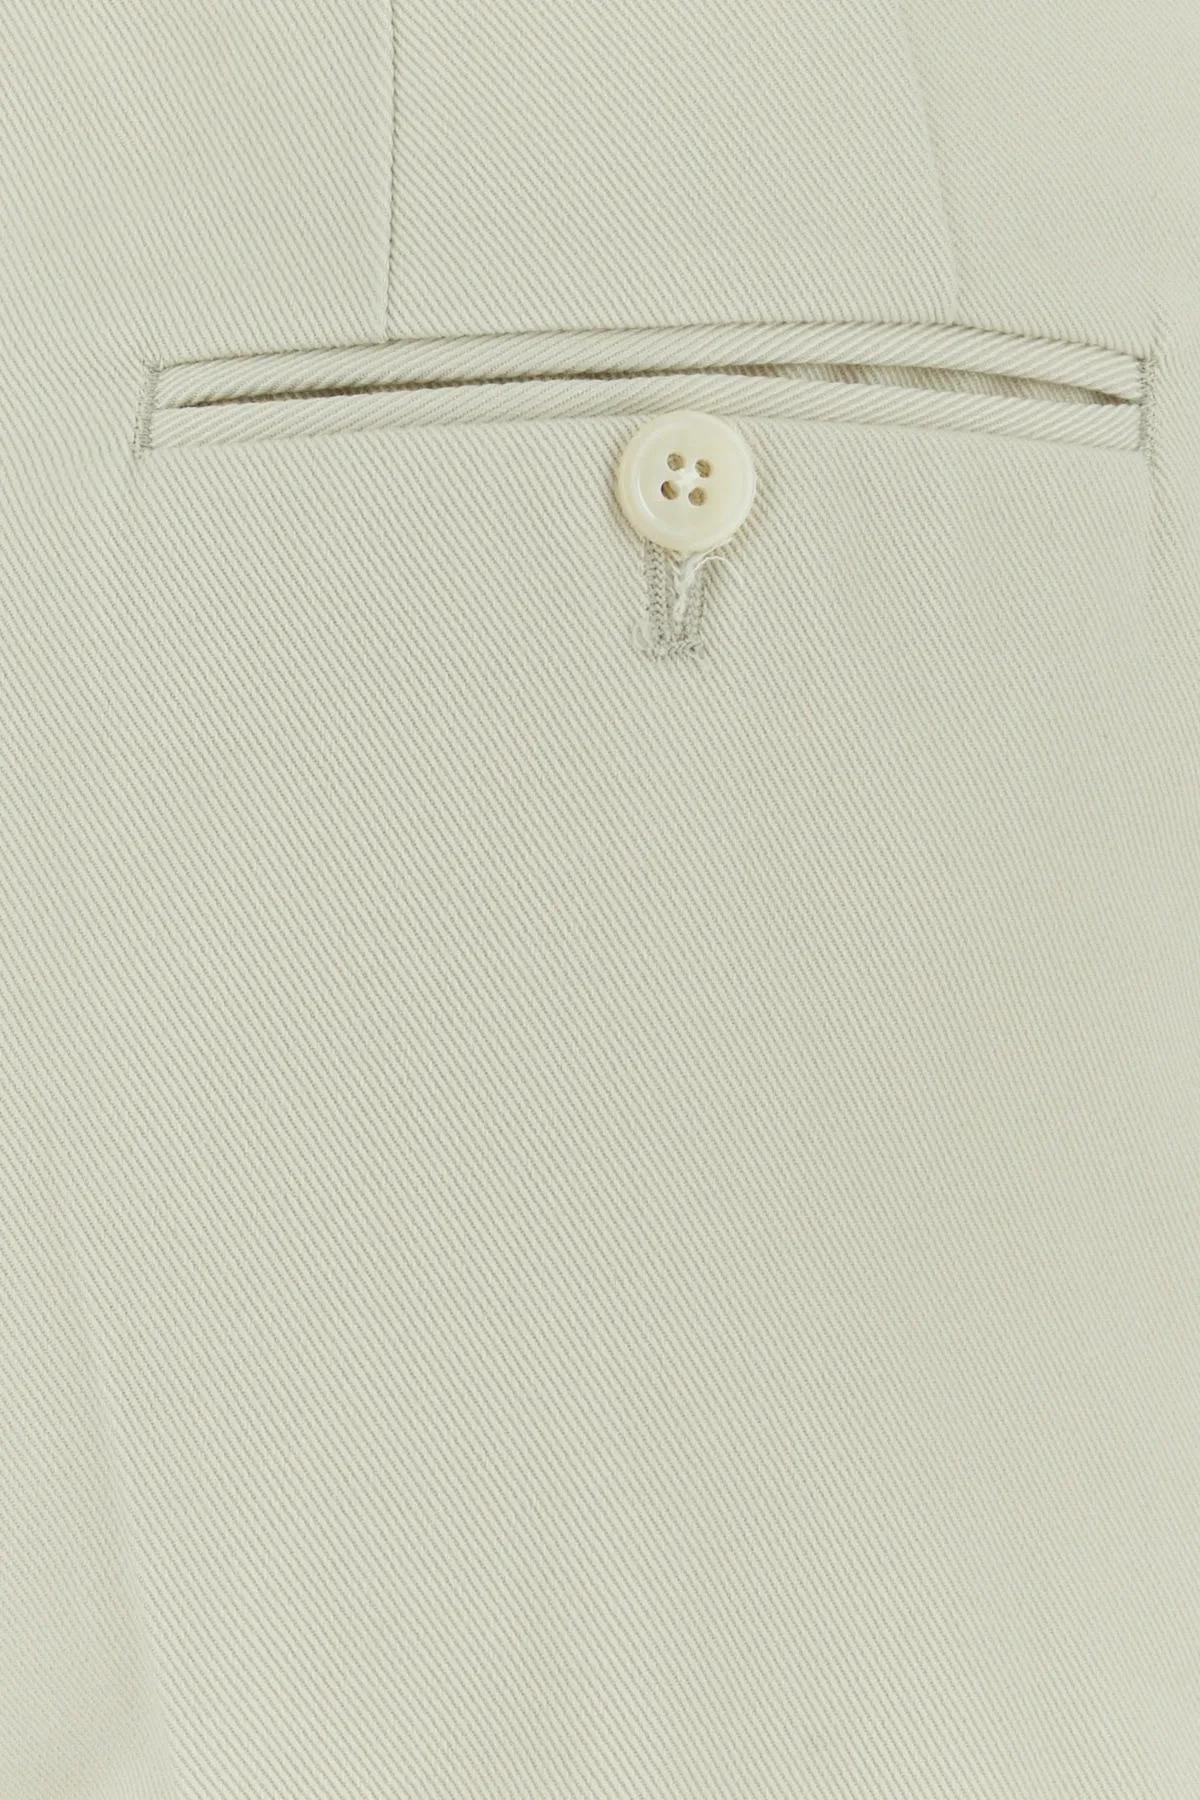 Shop Thom Browne Sand Cotton Shorts In Natural White